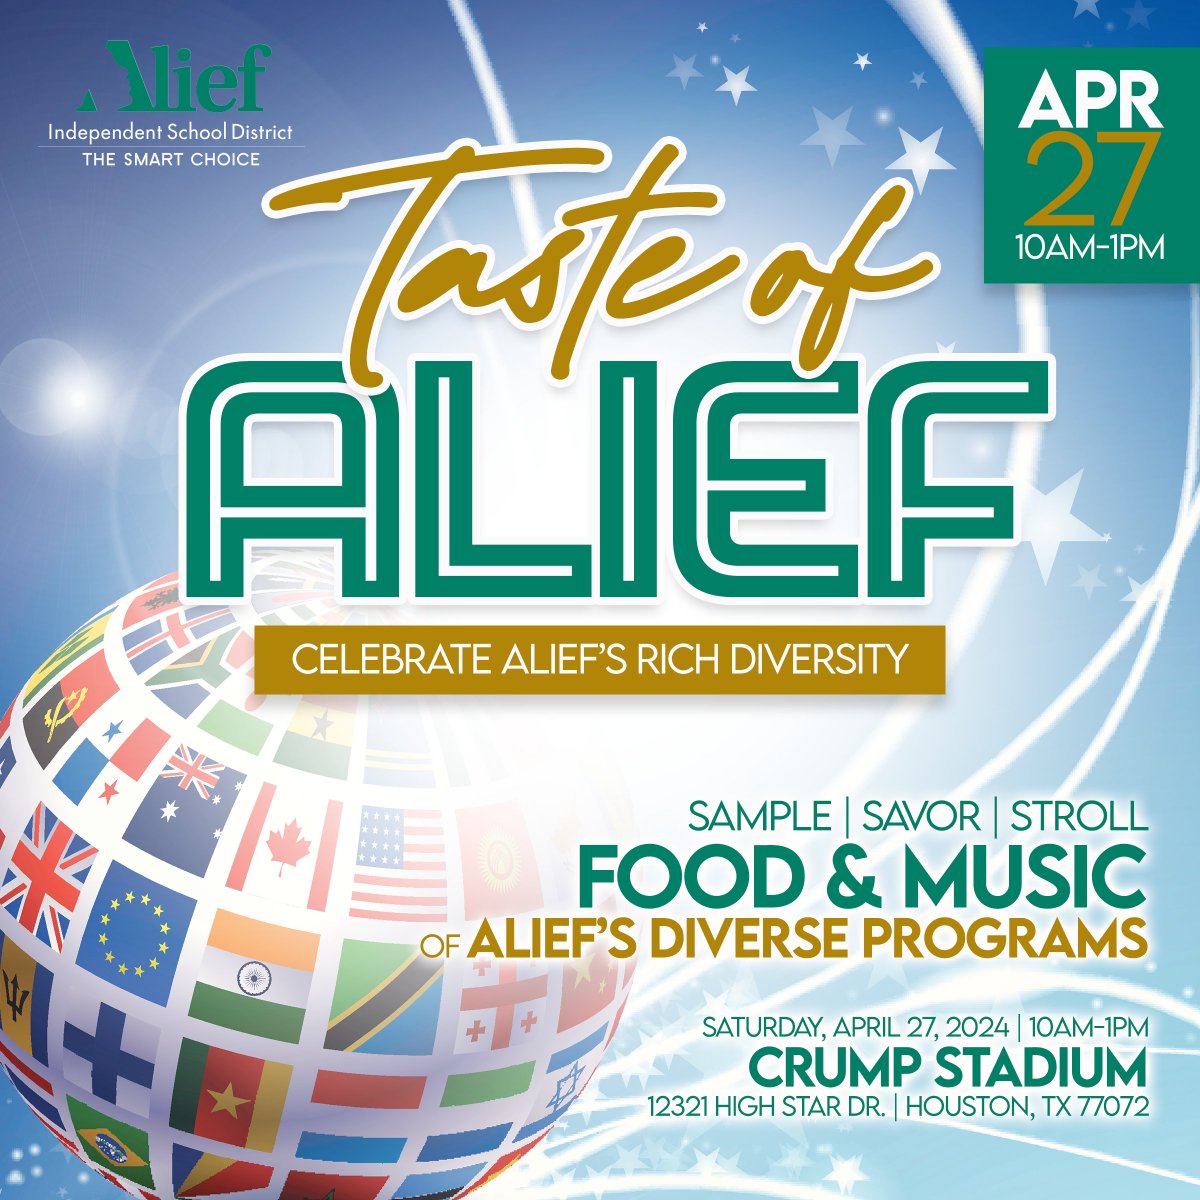 Don't forget to mark your calendar for Saturday, April 27th! Our very first Taste of Alief event with food, performances, and lots of free activities for kids!